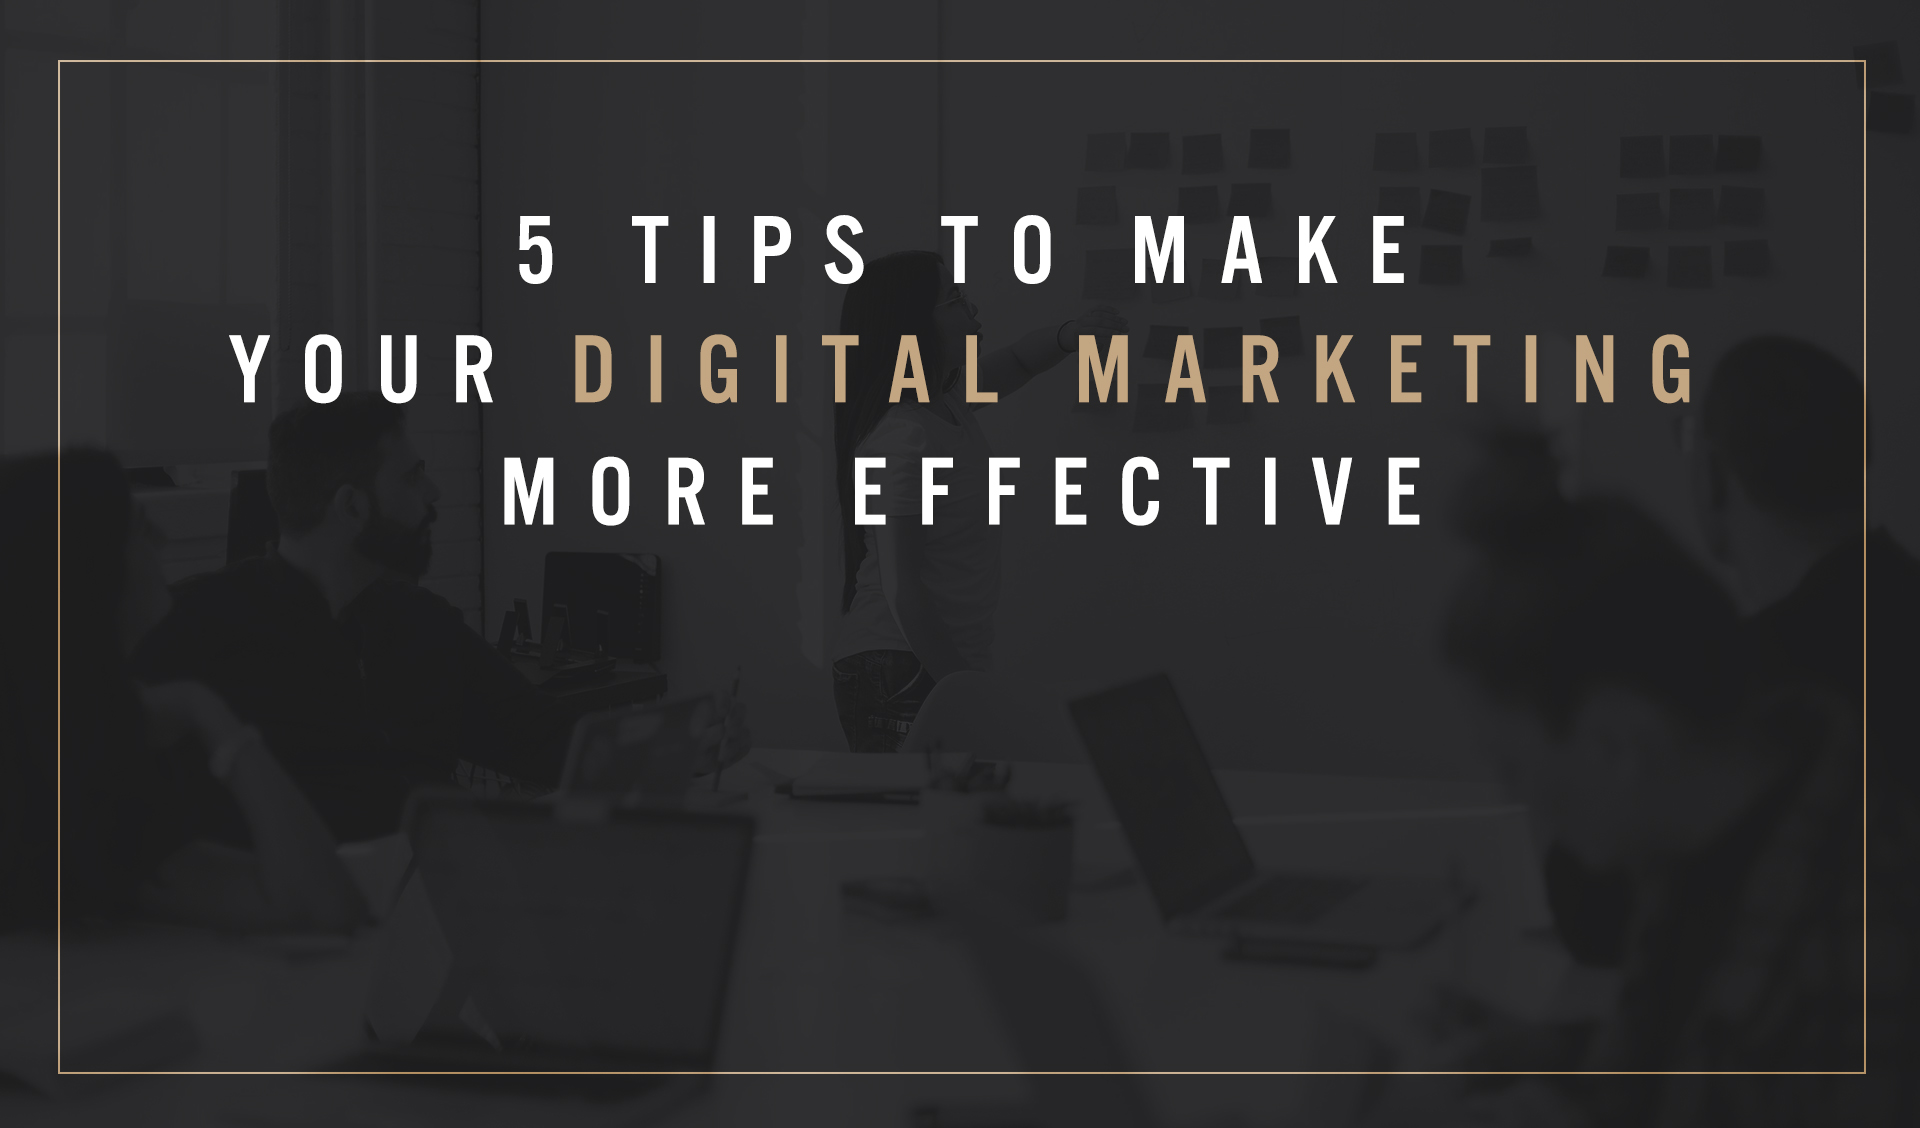 Make Your Marketing More Effective